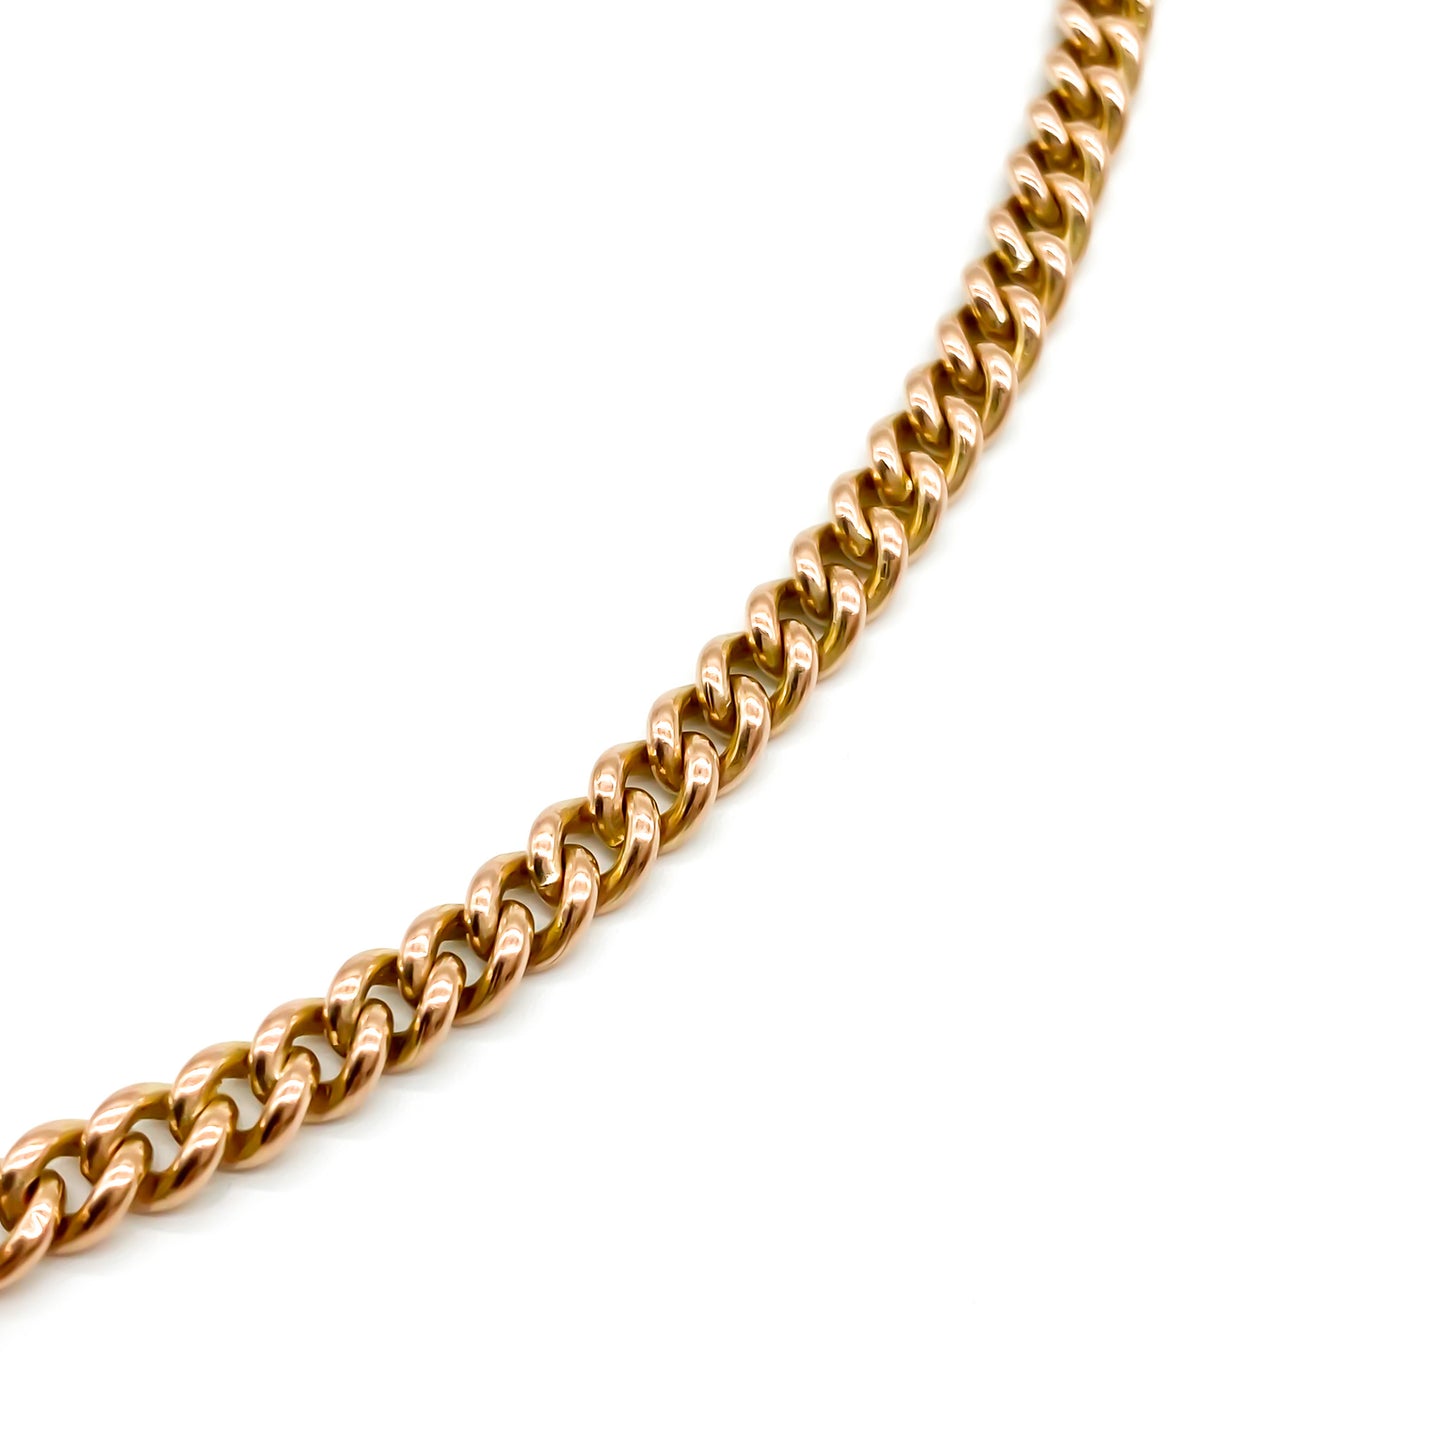 Classic Victorian 9ct rose gold fob chain with two dog-clips and a t-bar. Every link is stamped.